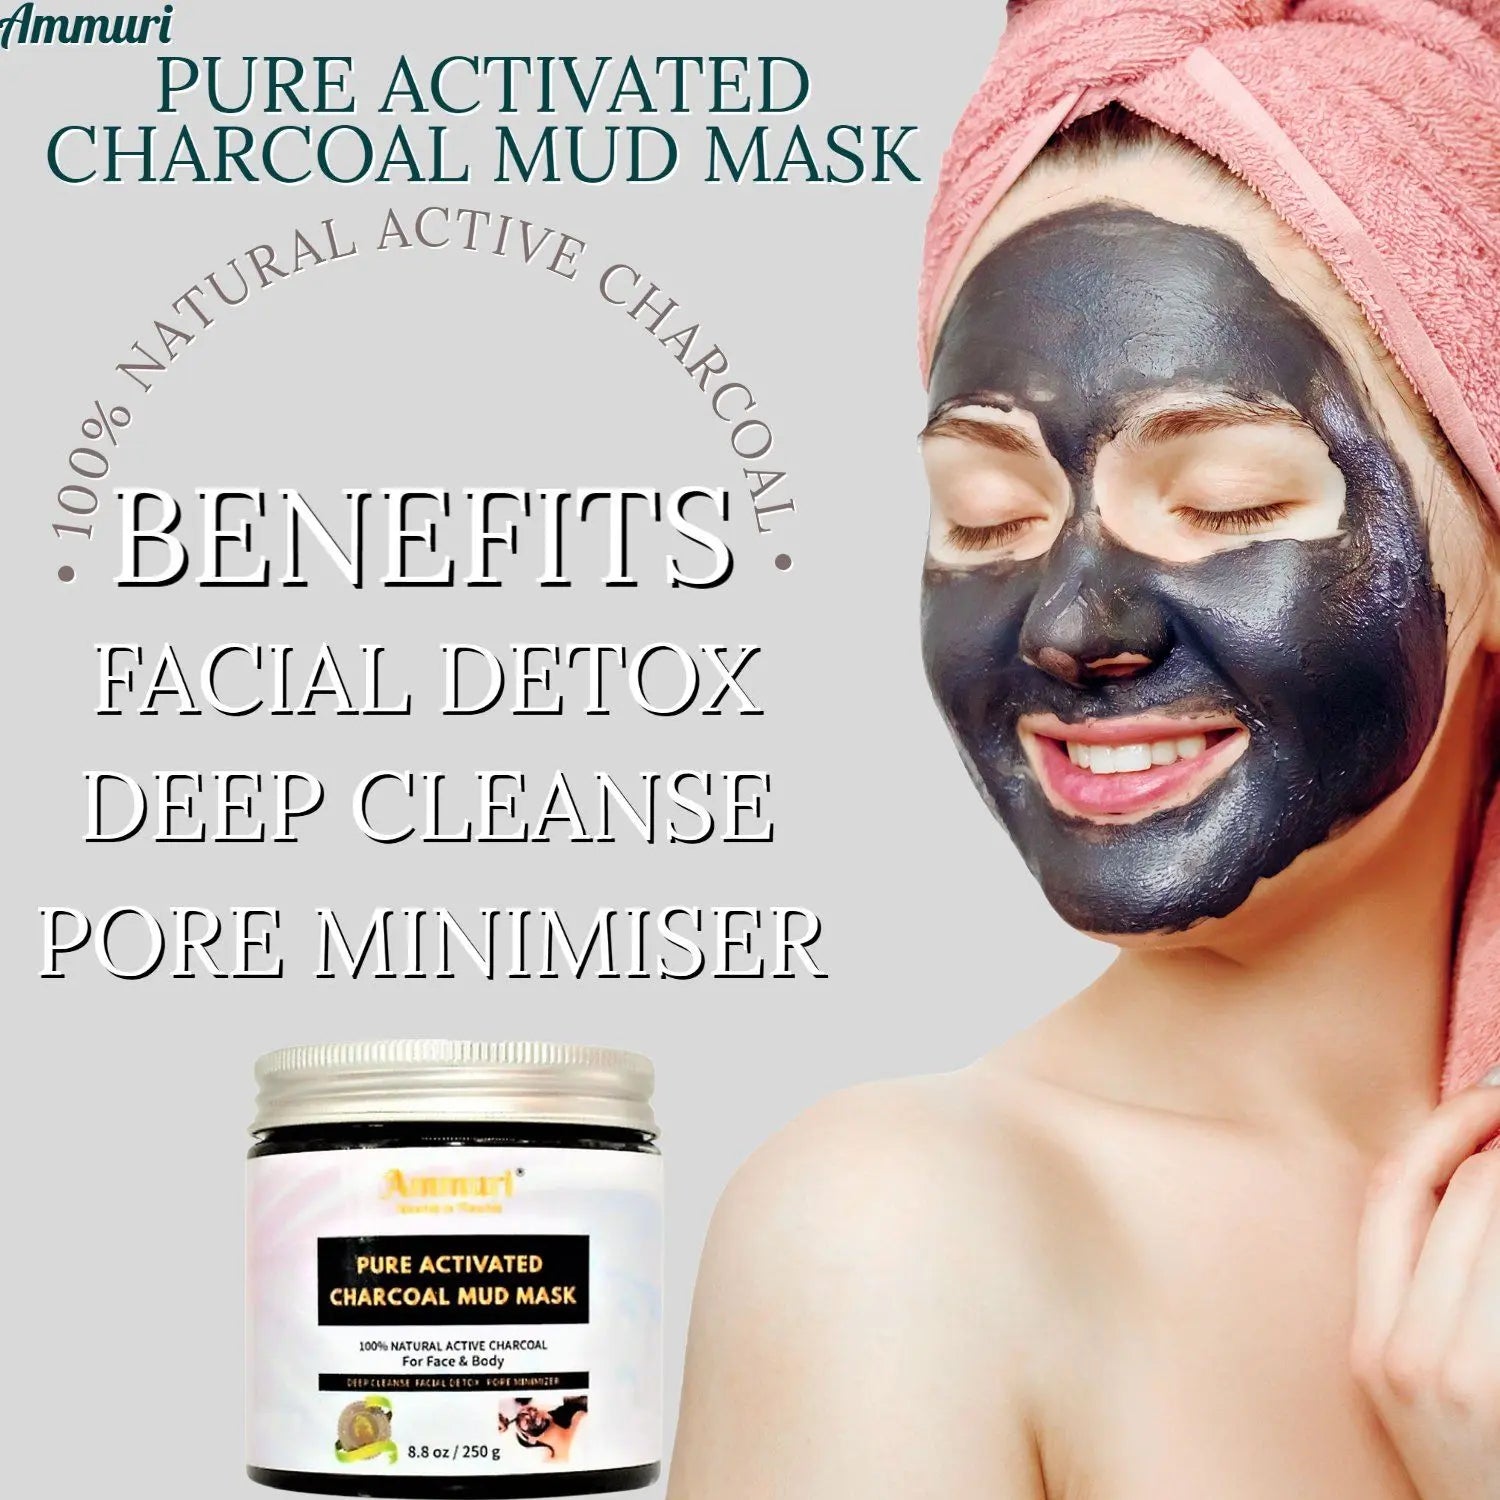 Pure Activated Charcoal Face & Body Mud Mask for Men & Women 250g Ammuri Skincare